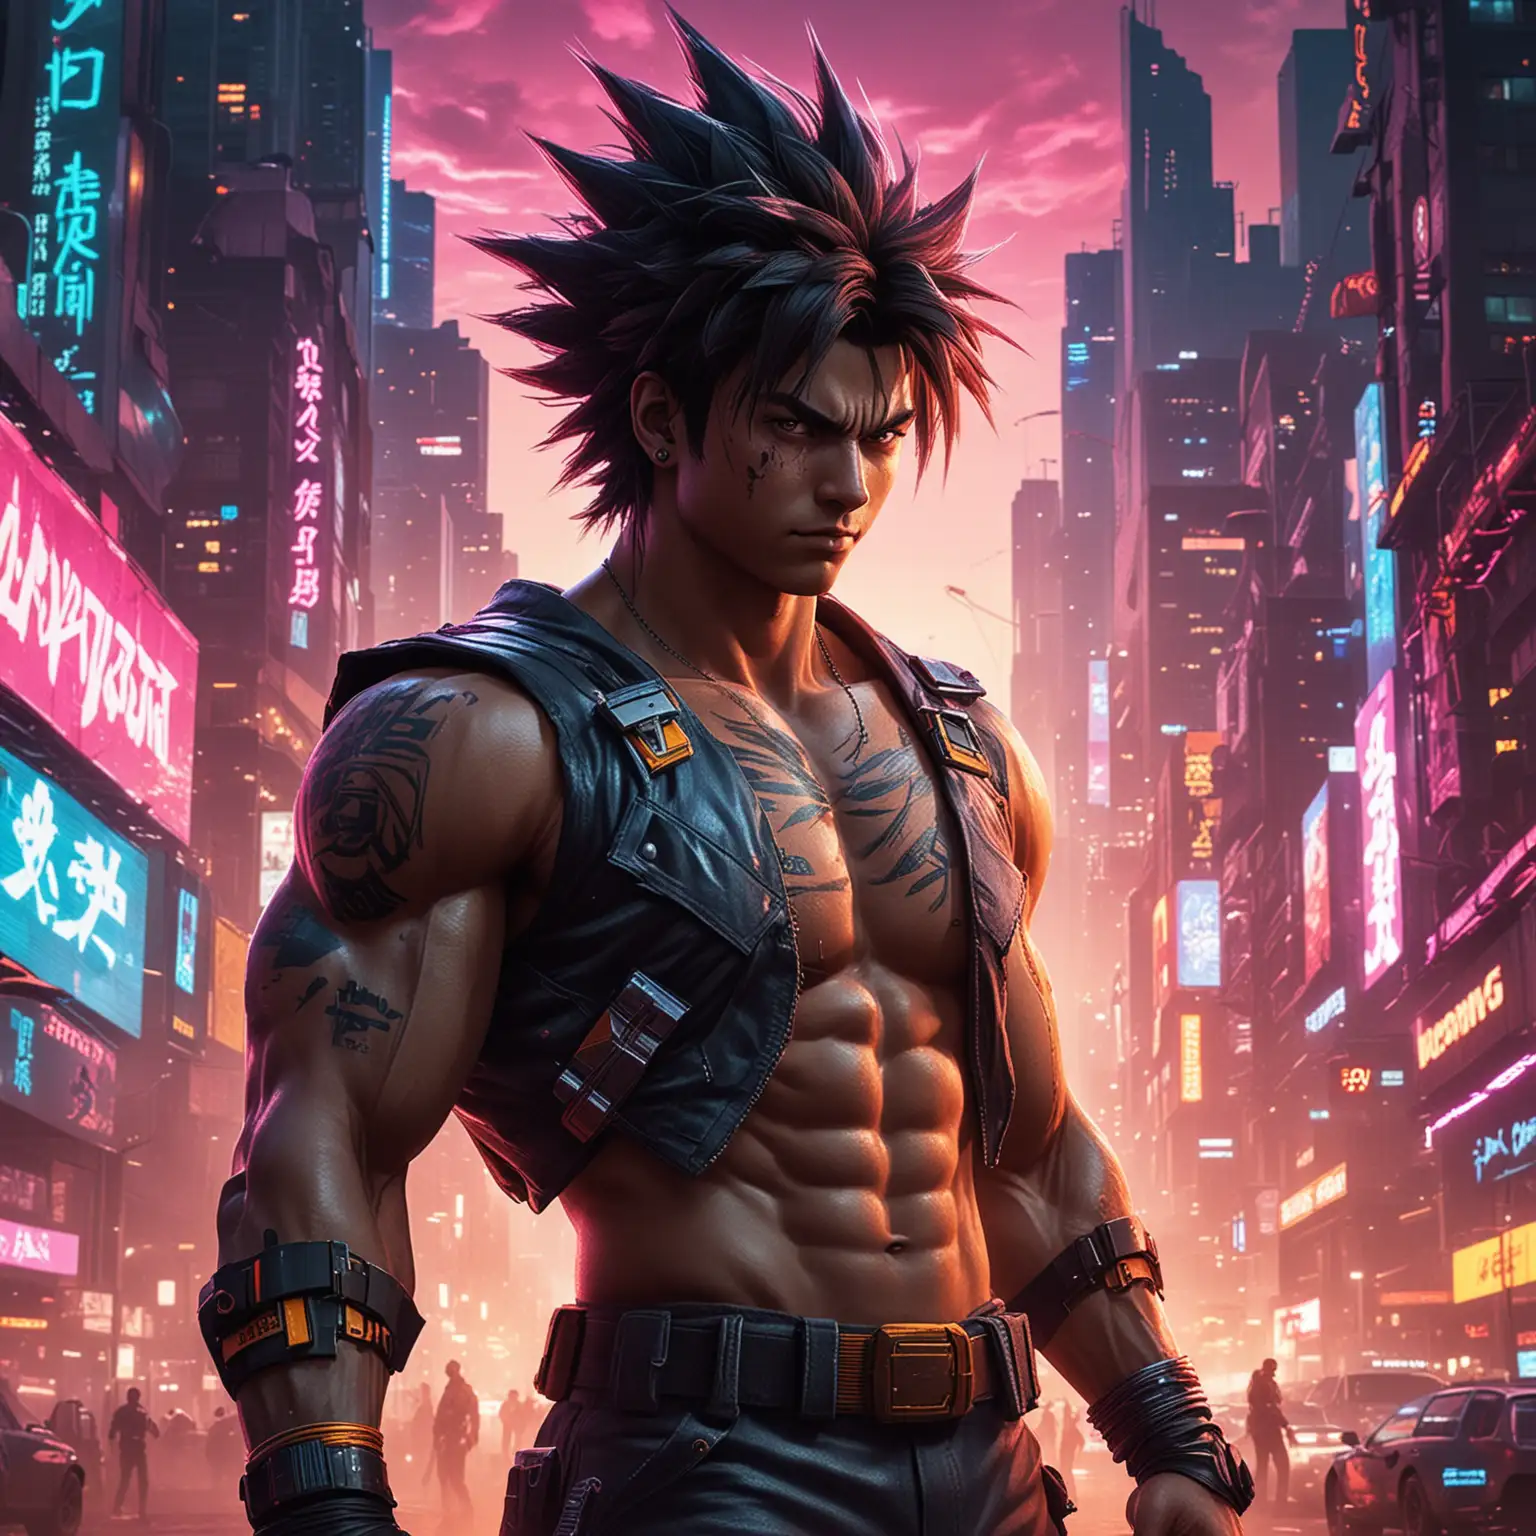 "Create an album cover for 'Power Unleashed' that visually blends the high-energy and iconic imagery of an anime superhero with the gritty, neon-lit backdrop of Cyberpunk 2077. The cover should feature Goku, depicted in mid-transformation, with his energy surging around him as he stands against a cyberpunk cityscape. His pose should convey immense power and readiness for battle, with vibrant colors that pop against a darker, futuristic urban environment."